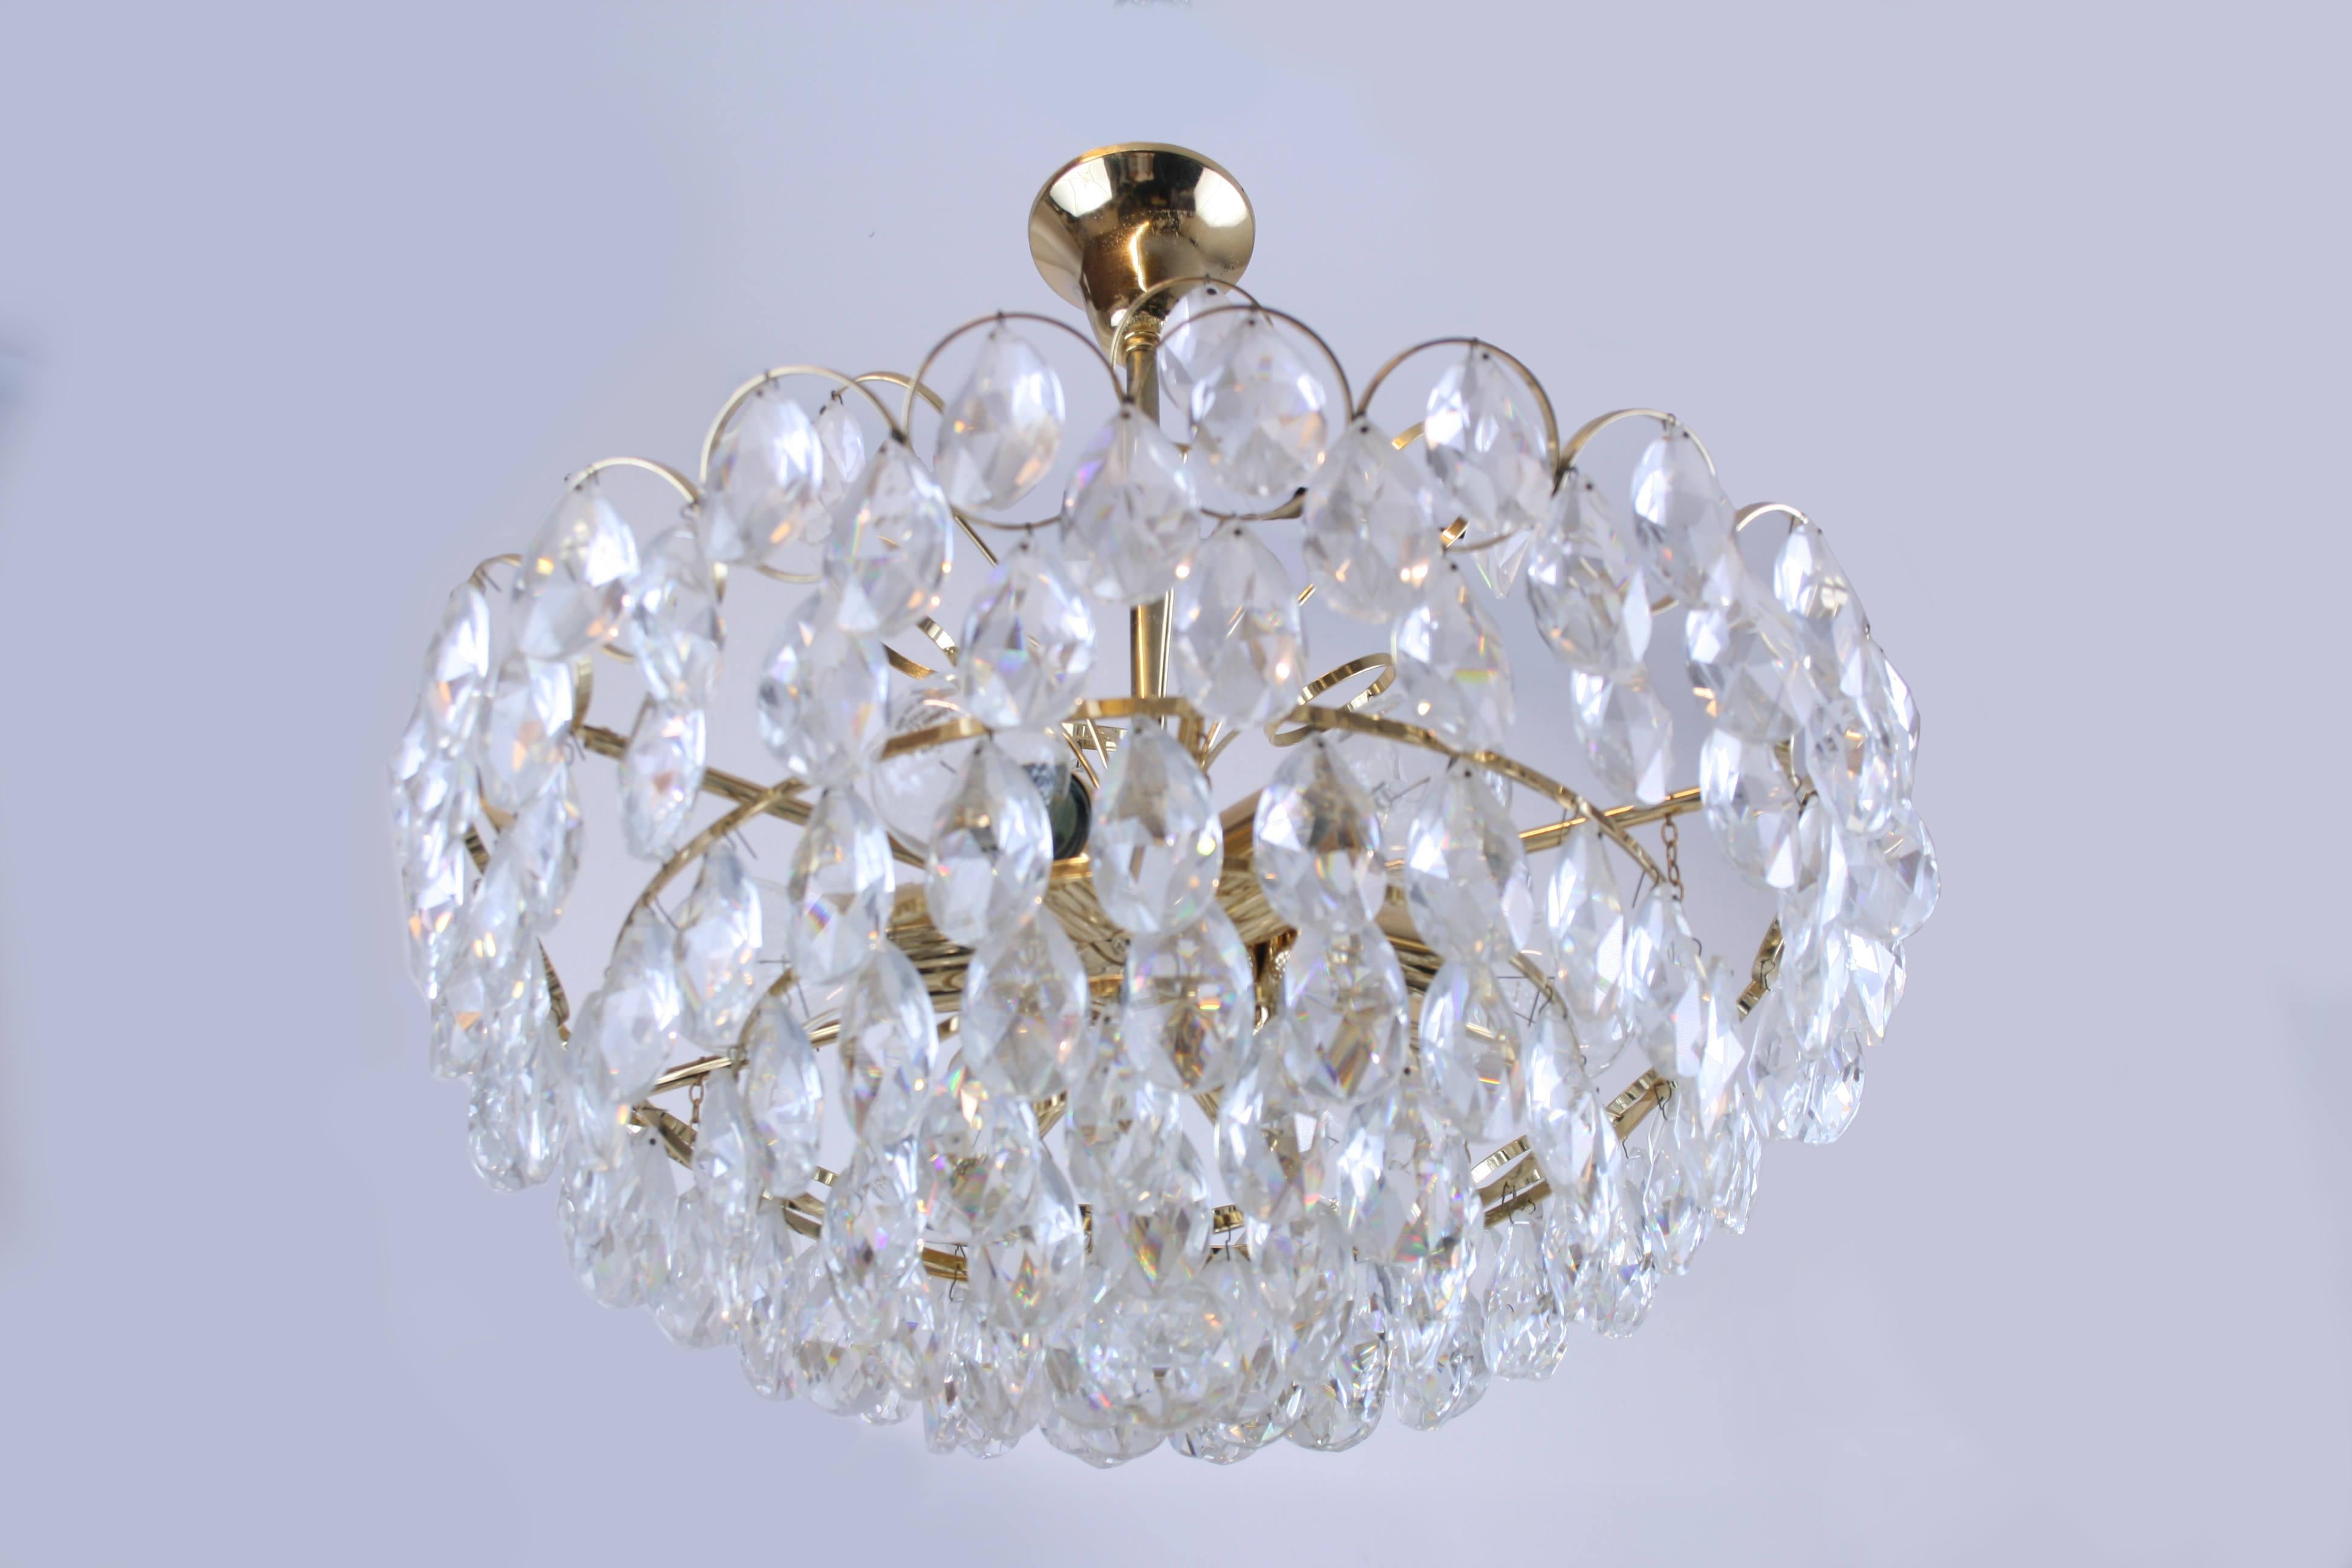 Beveled 20th Century Guilded Crystal Brass Chandelier by Palwa Large Pendant Lamp For Sale